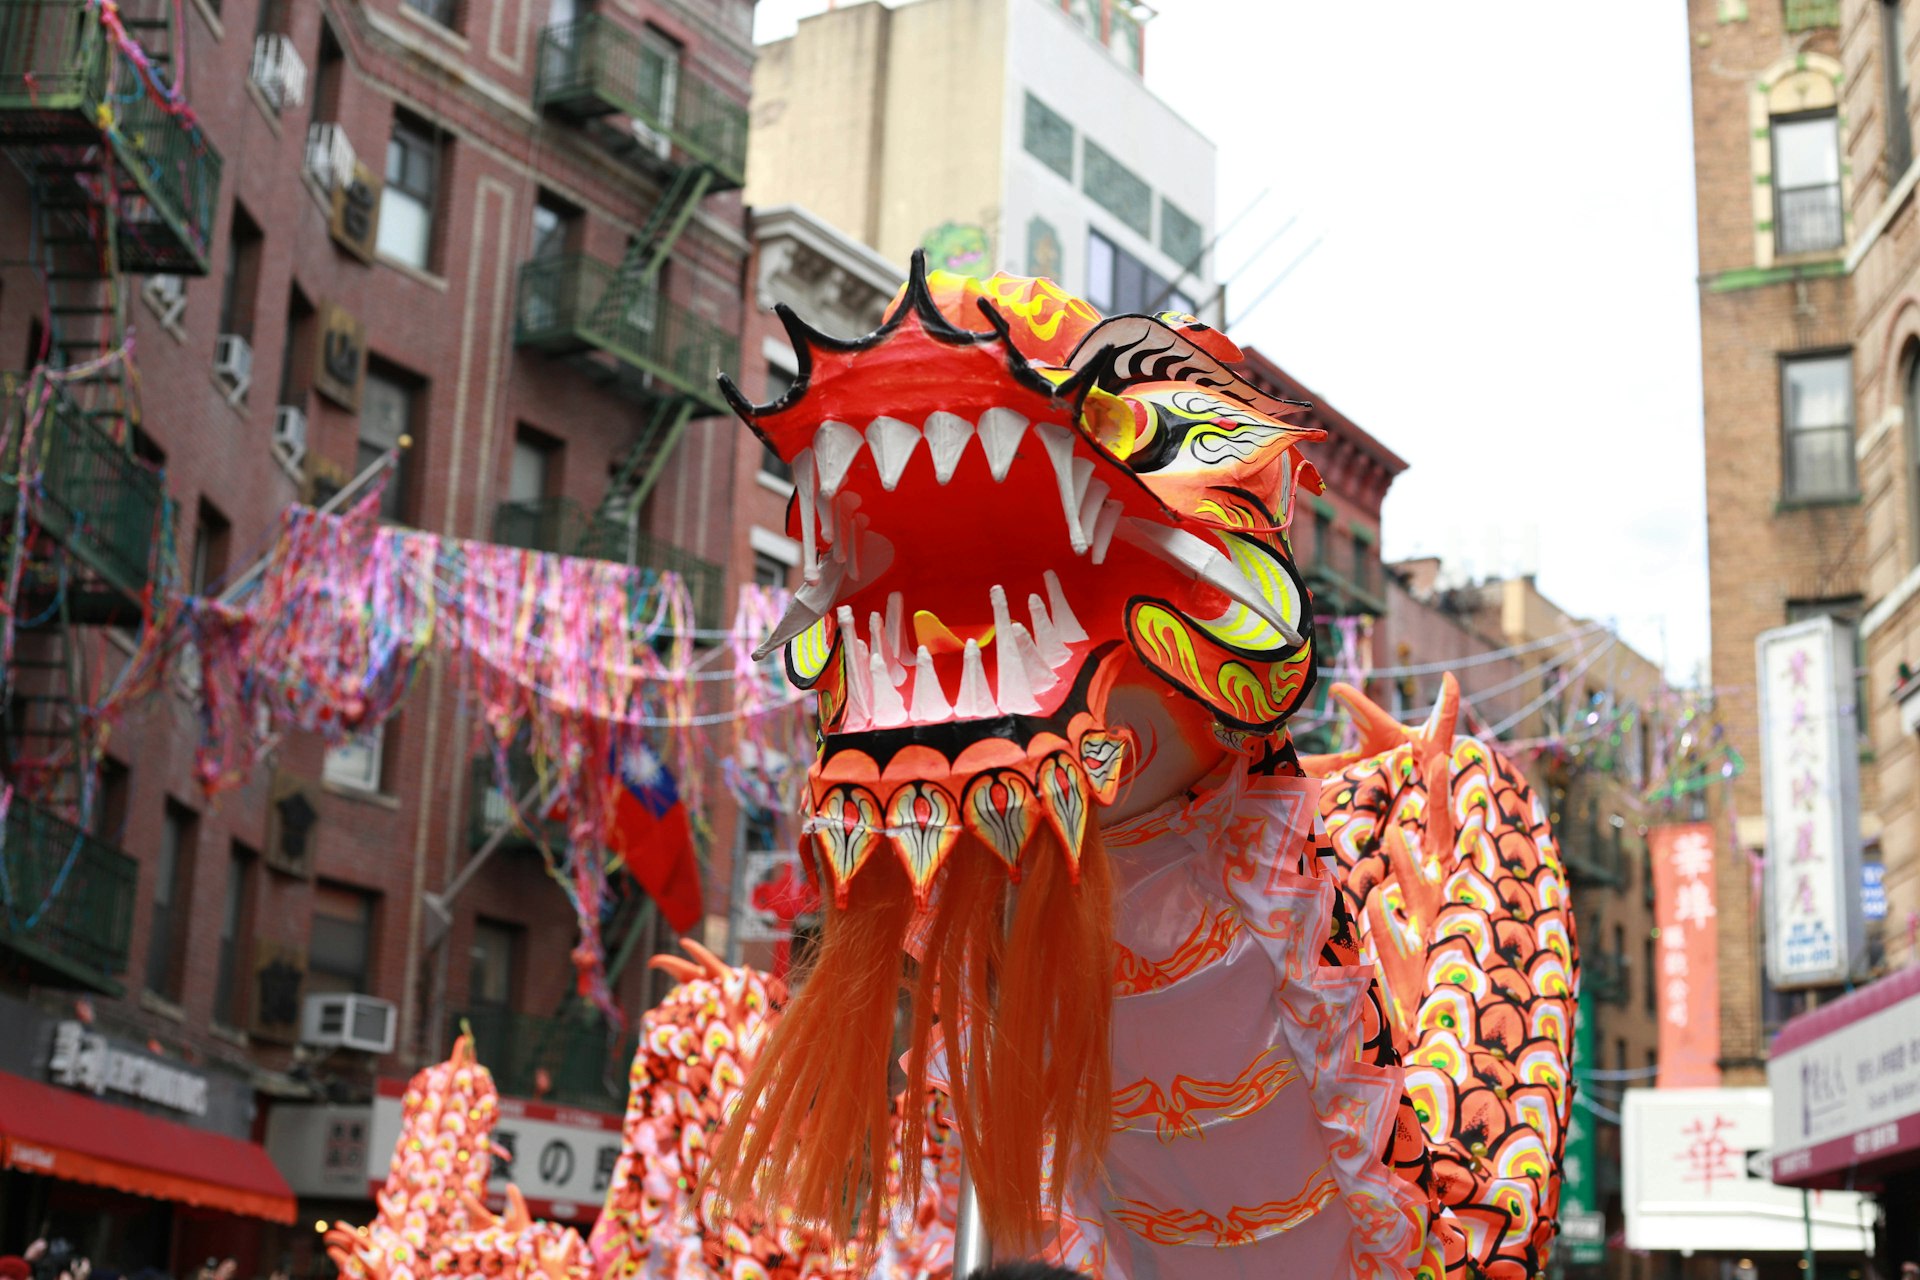 A roaring red dragon at the Chinese New Years parade in New York City 